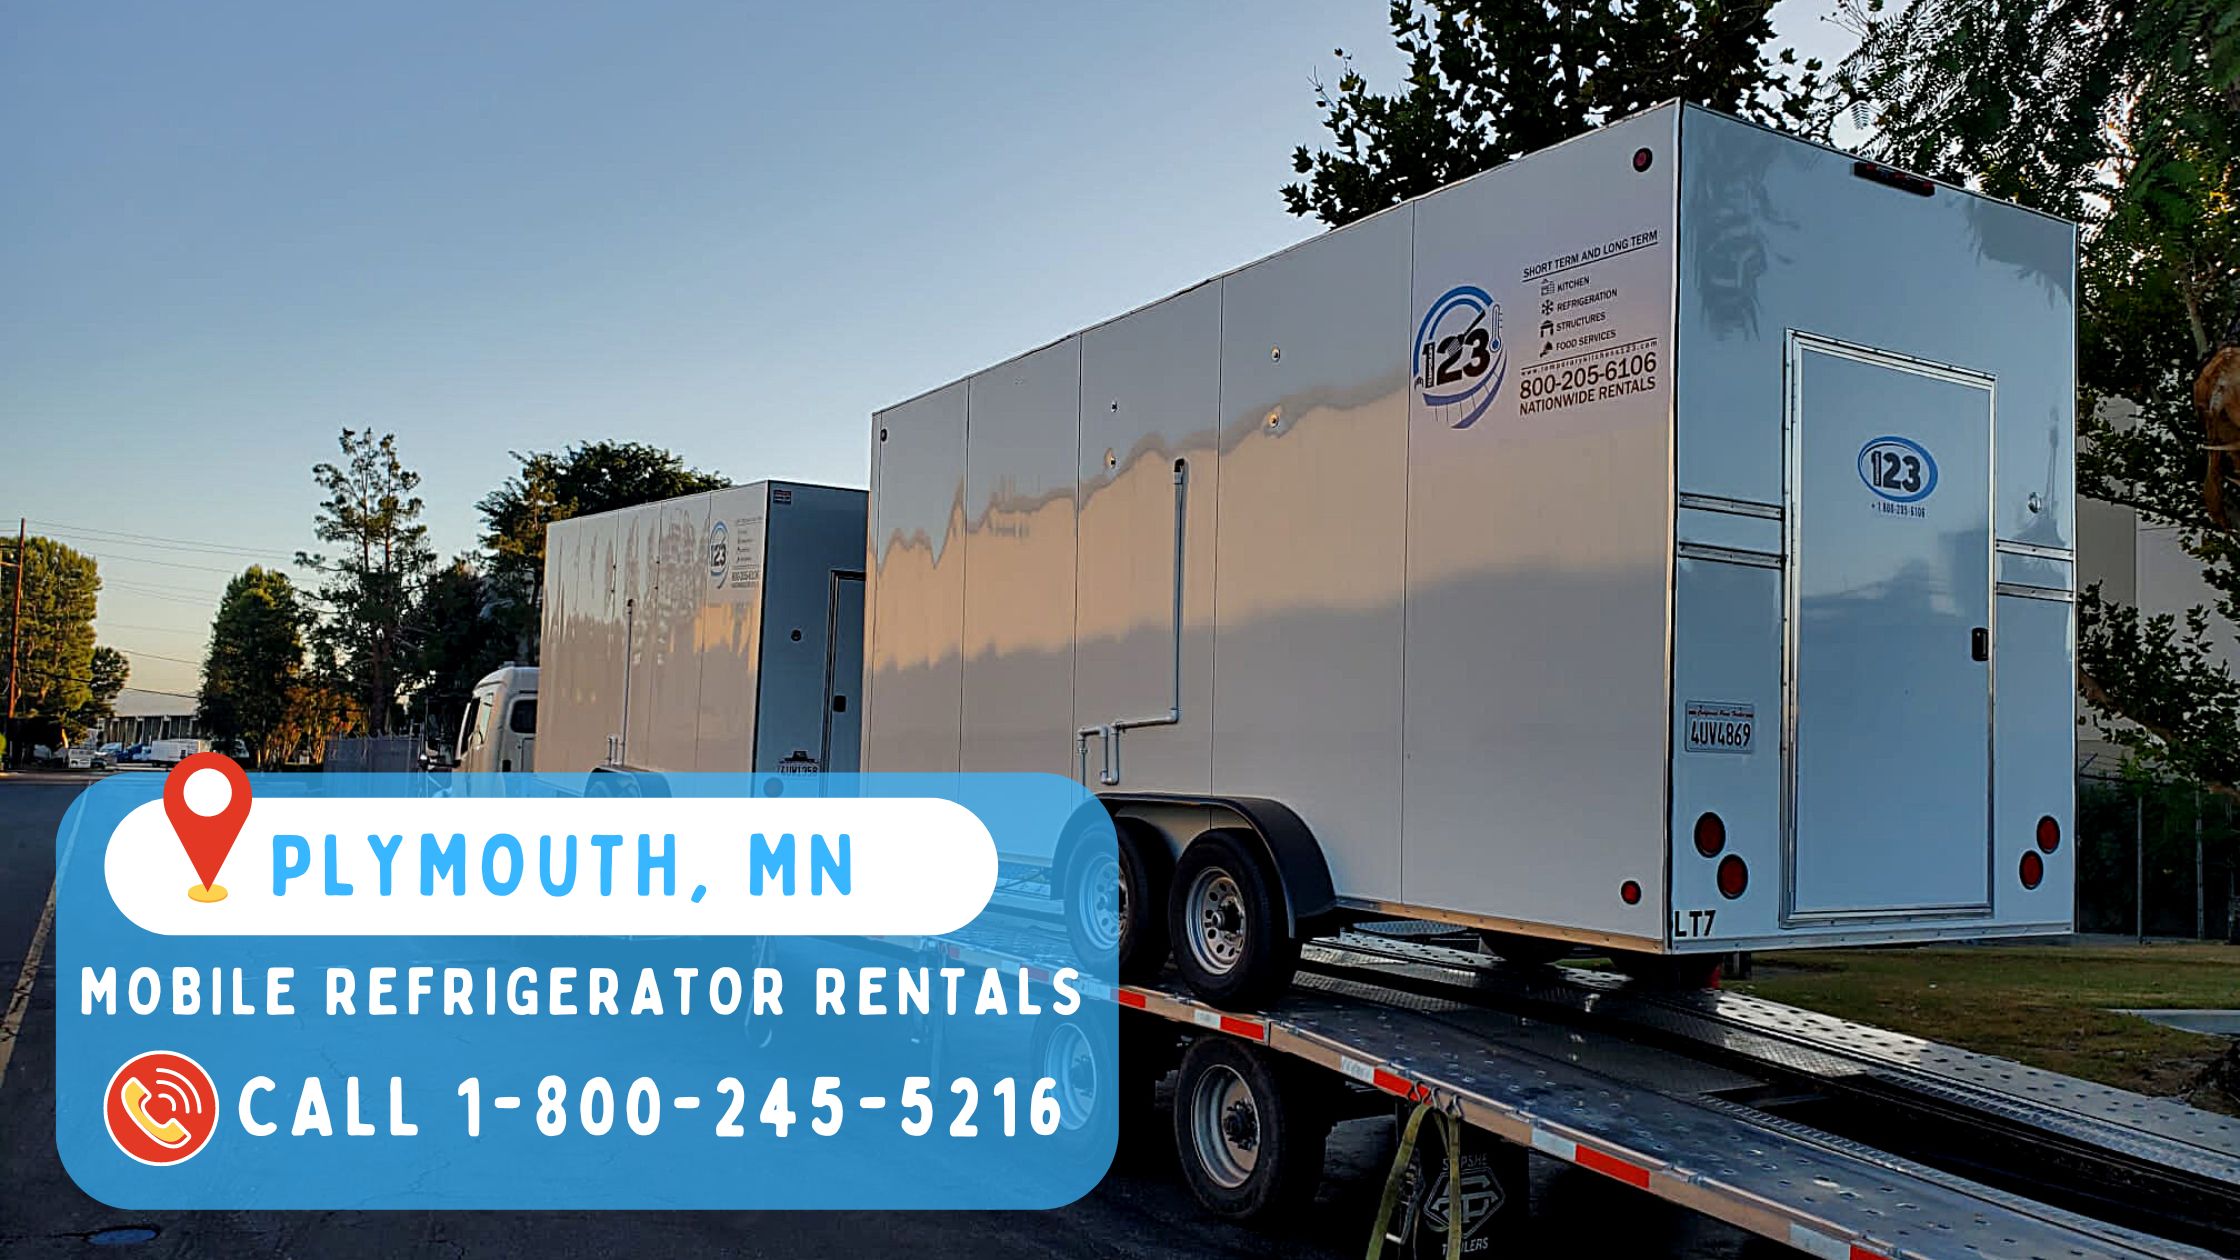 Mobile refrigerator rentals in Plymouth